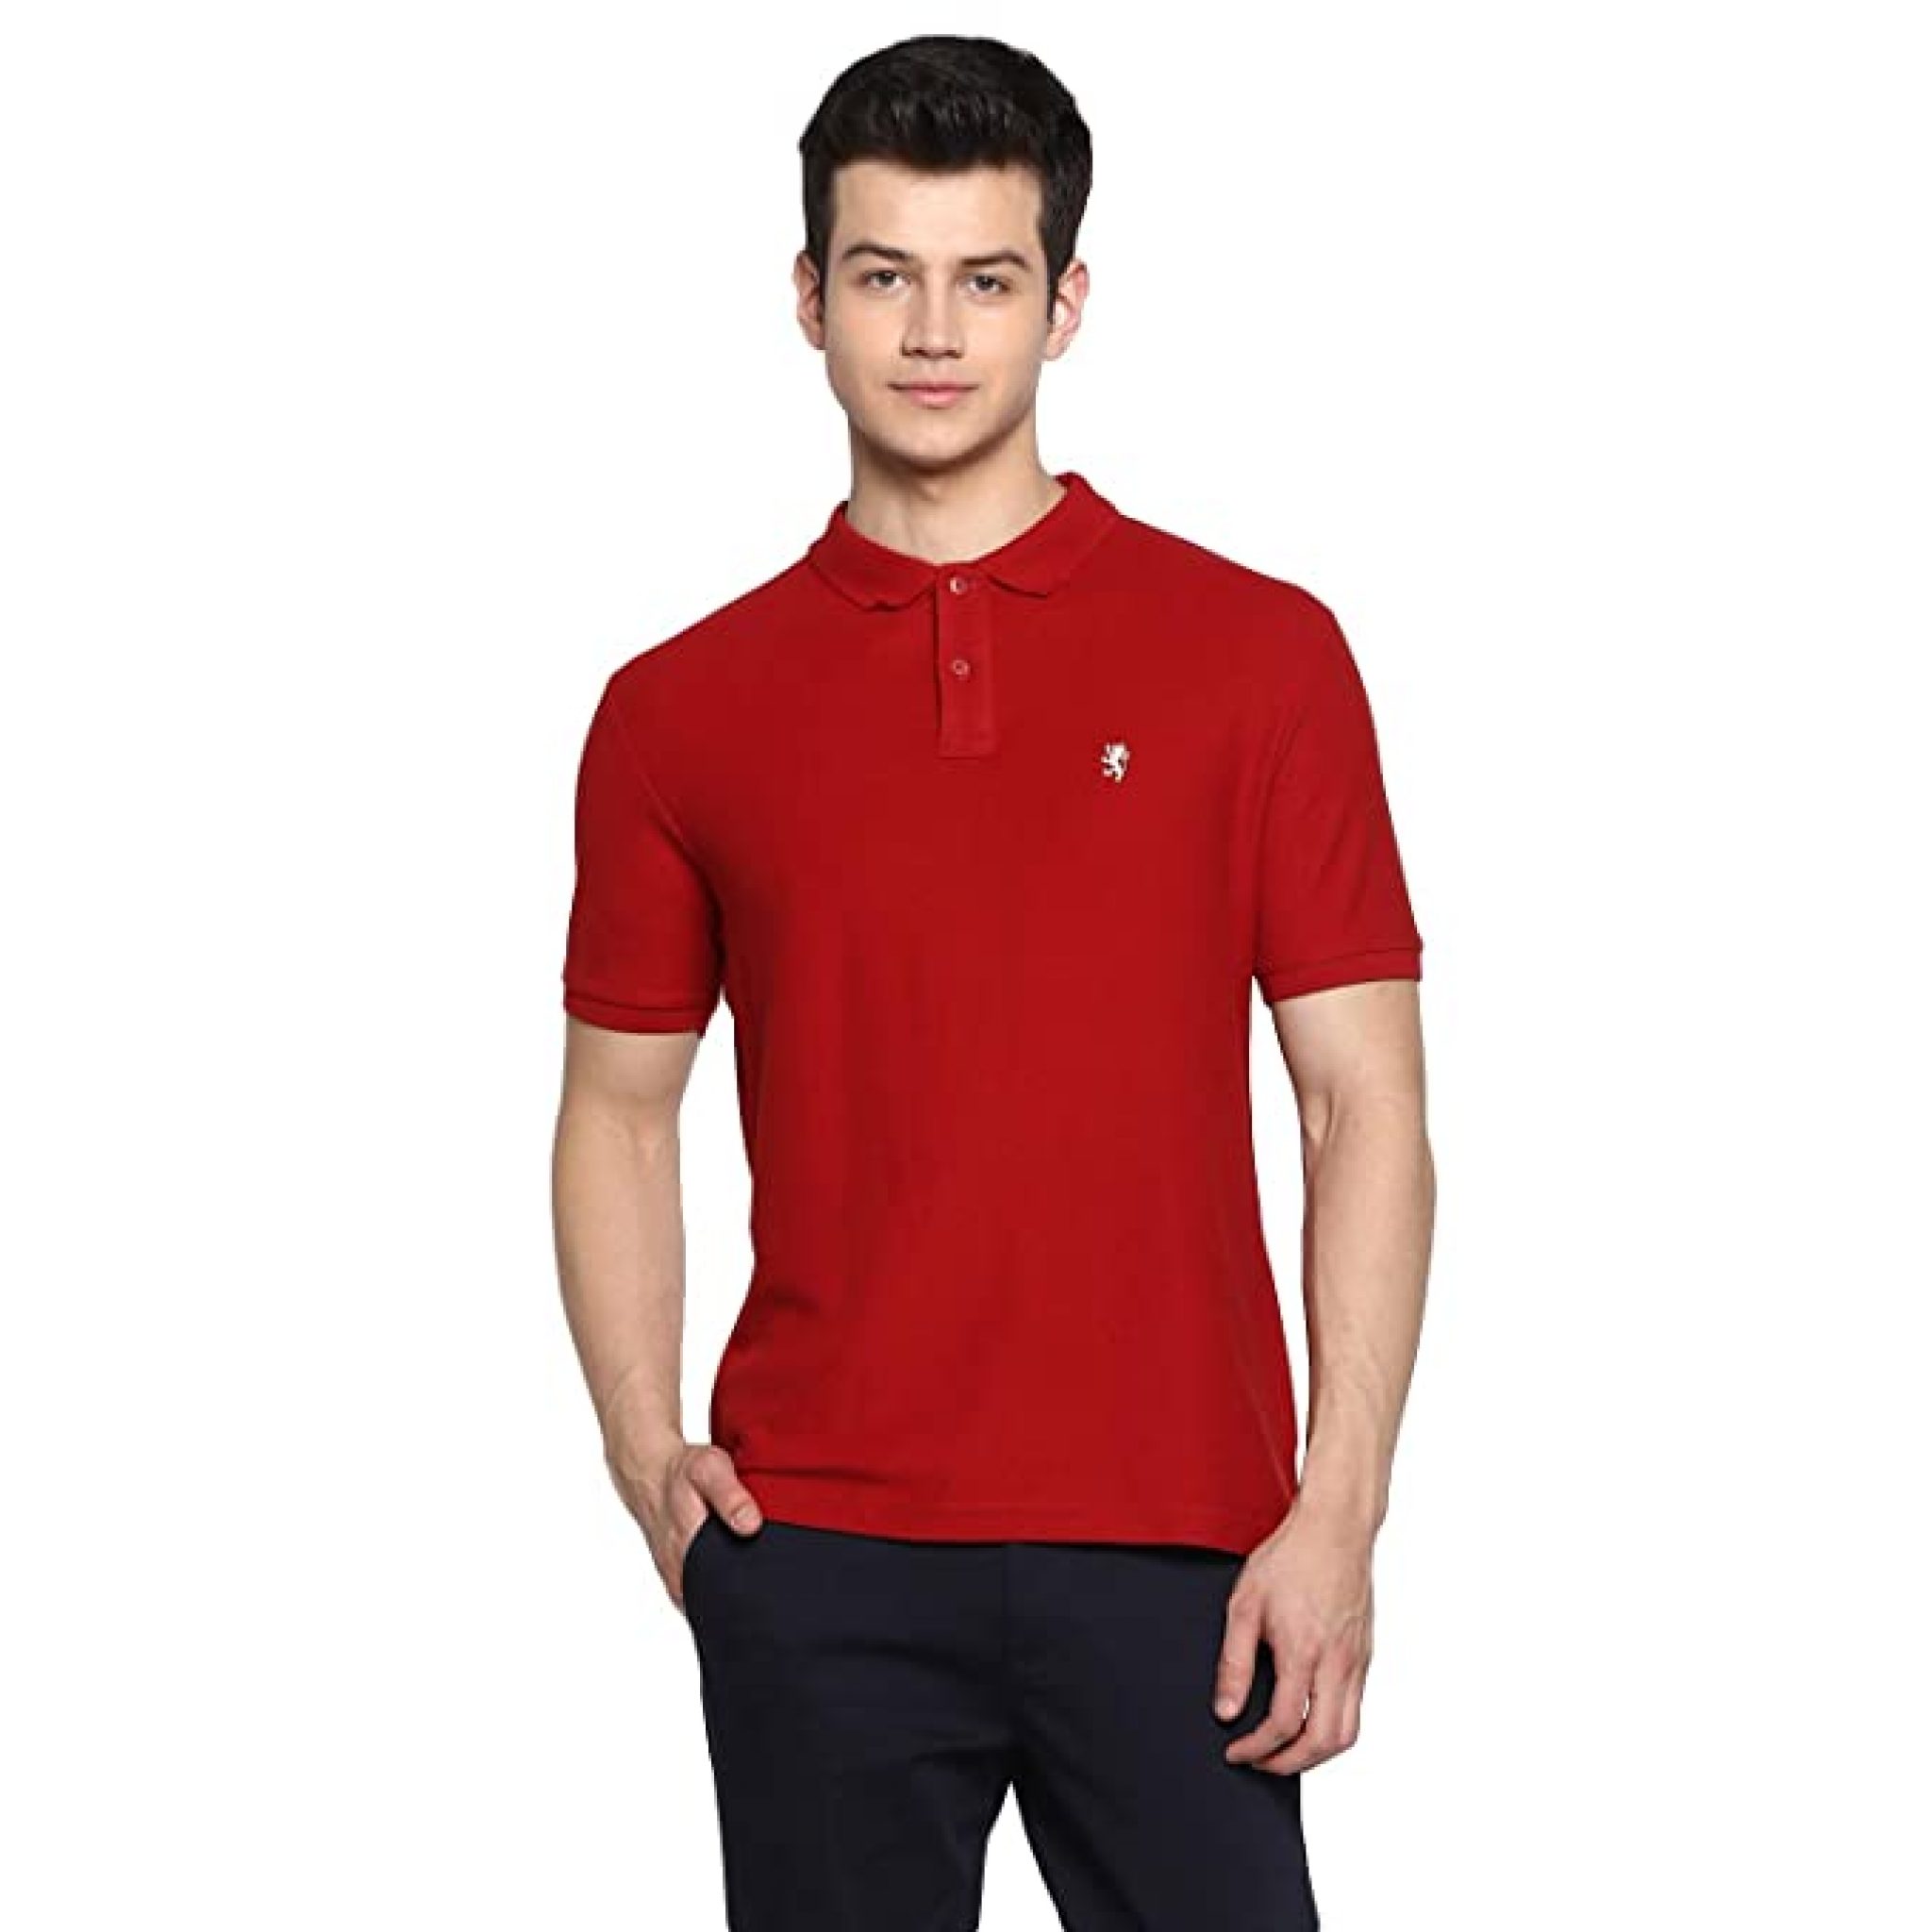 Upto 90% Off On Red Tape Mens Polo TShirt - OMGTricks